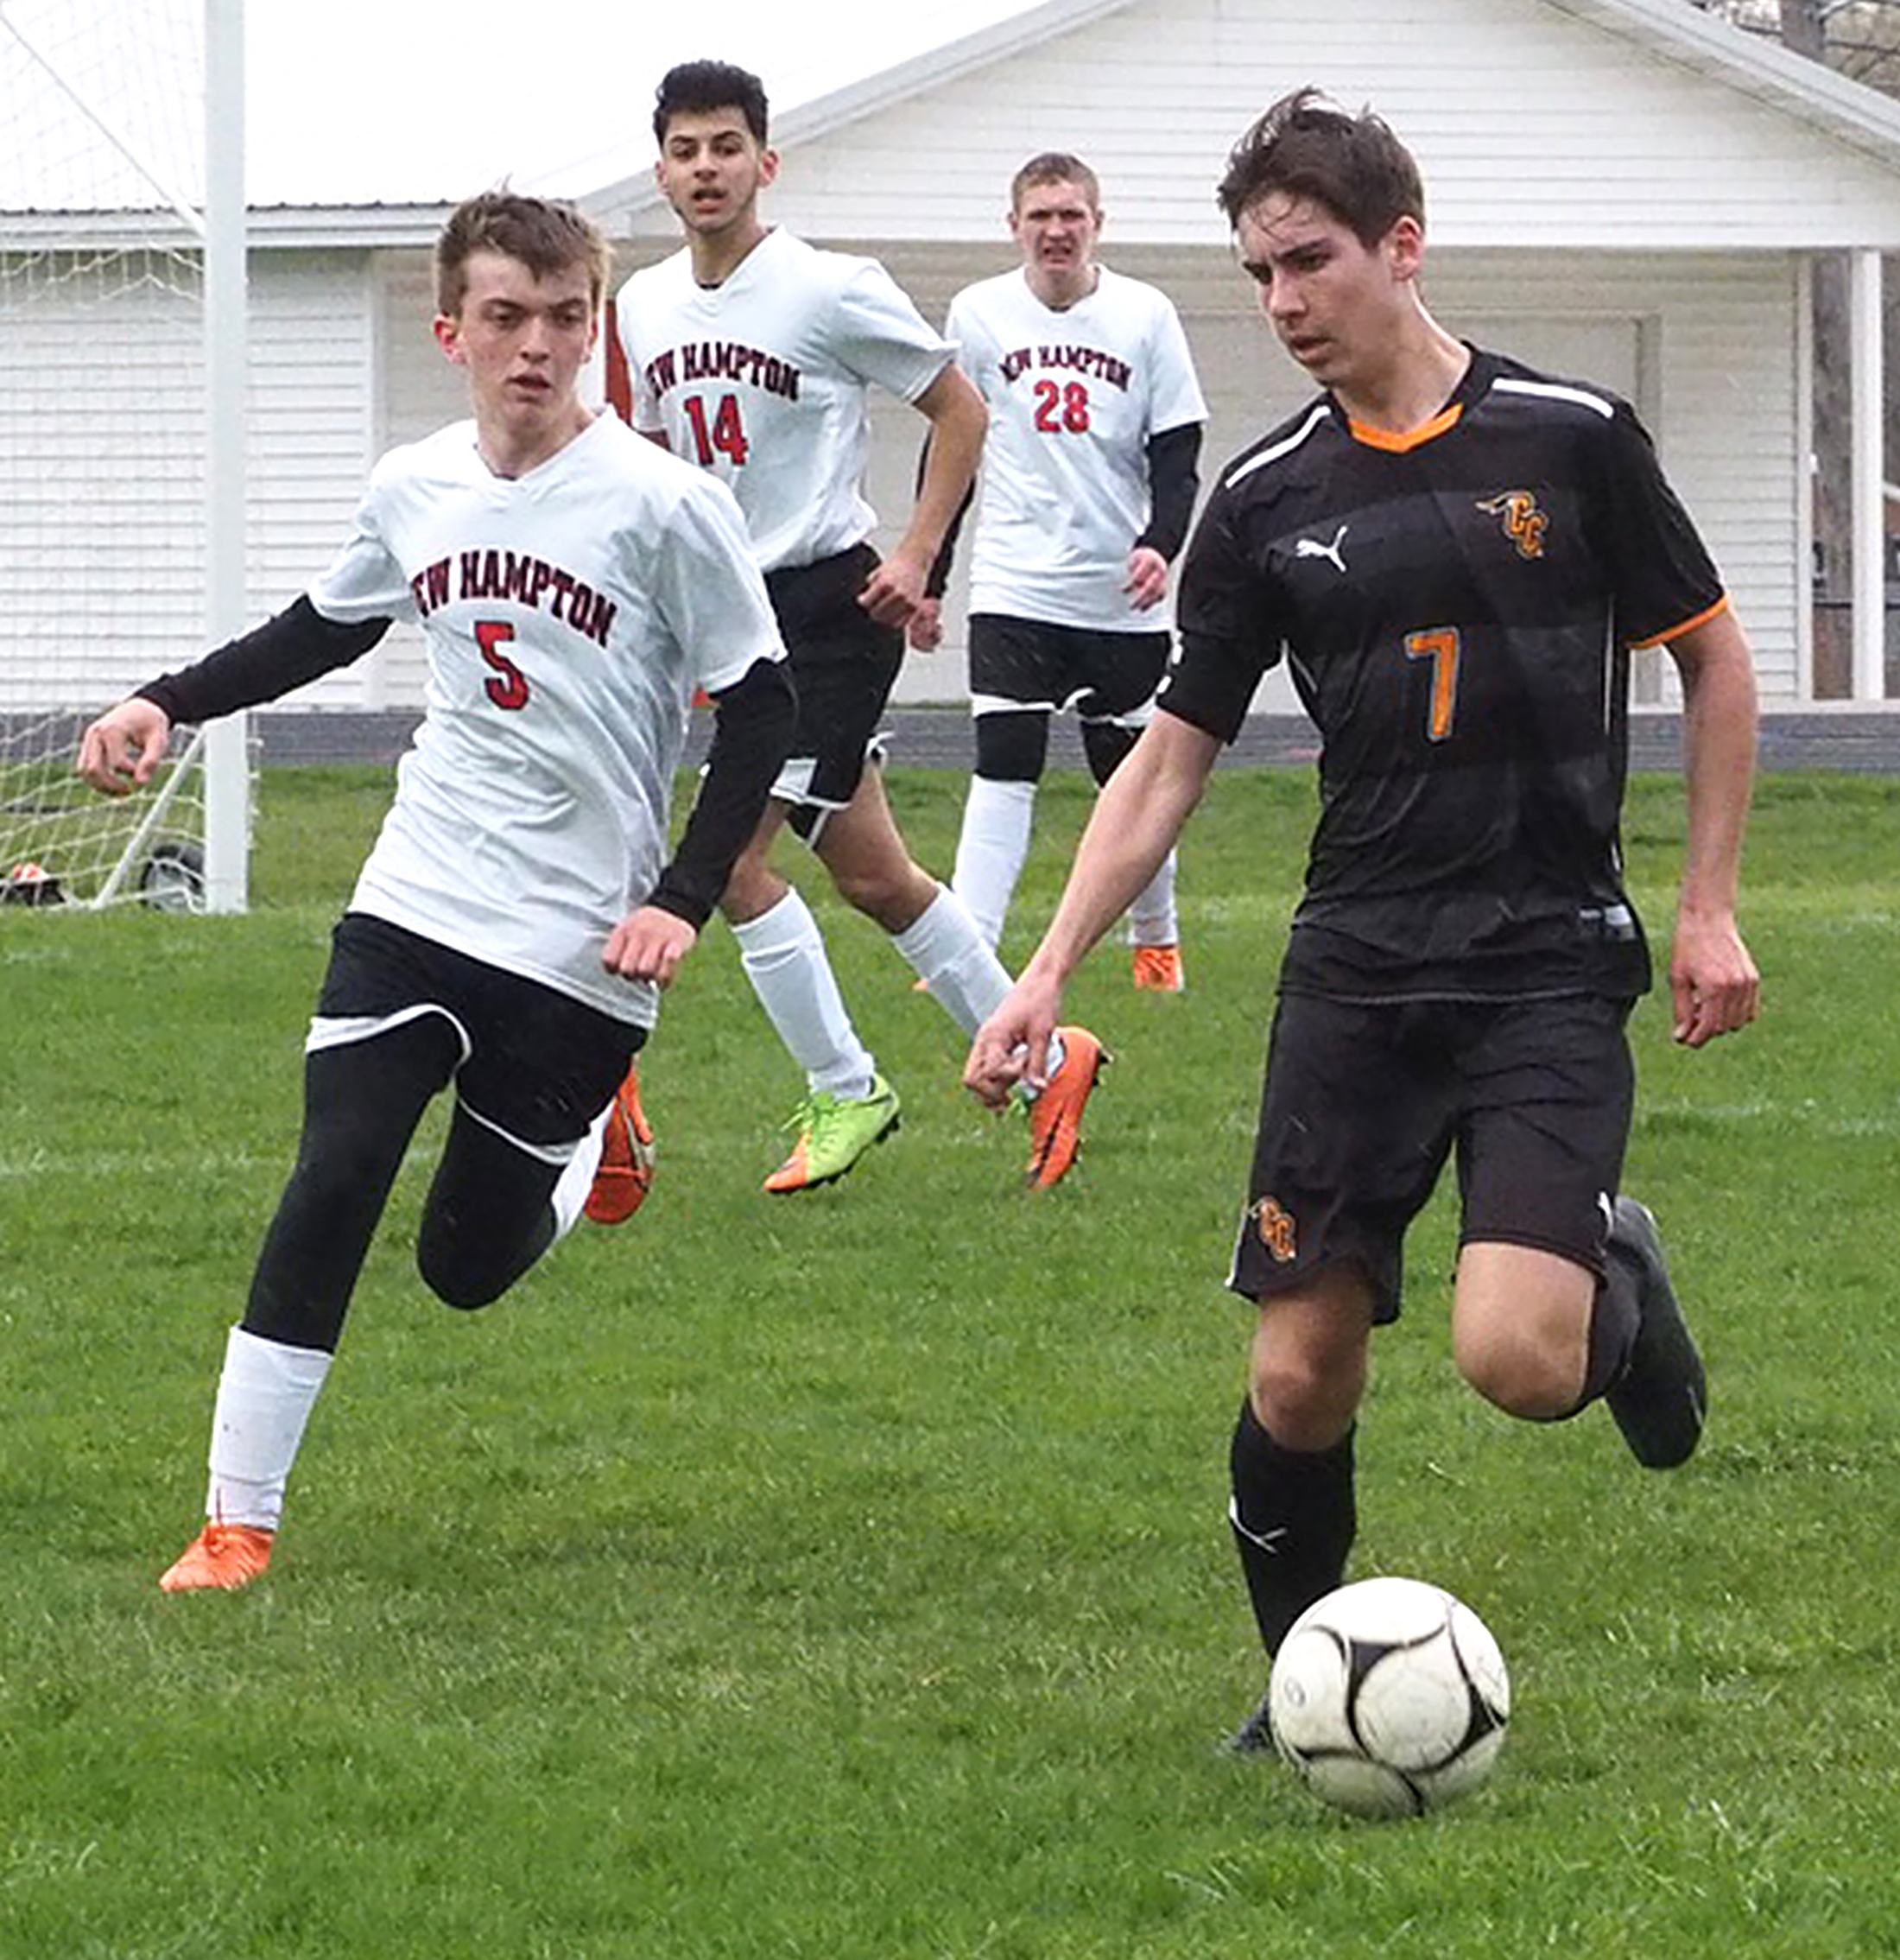 Comet kickers defeat Chickasaws 3-1 for first win of season